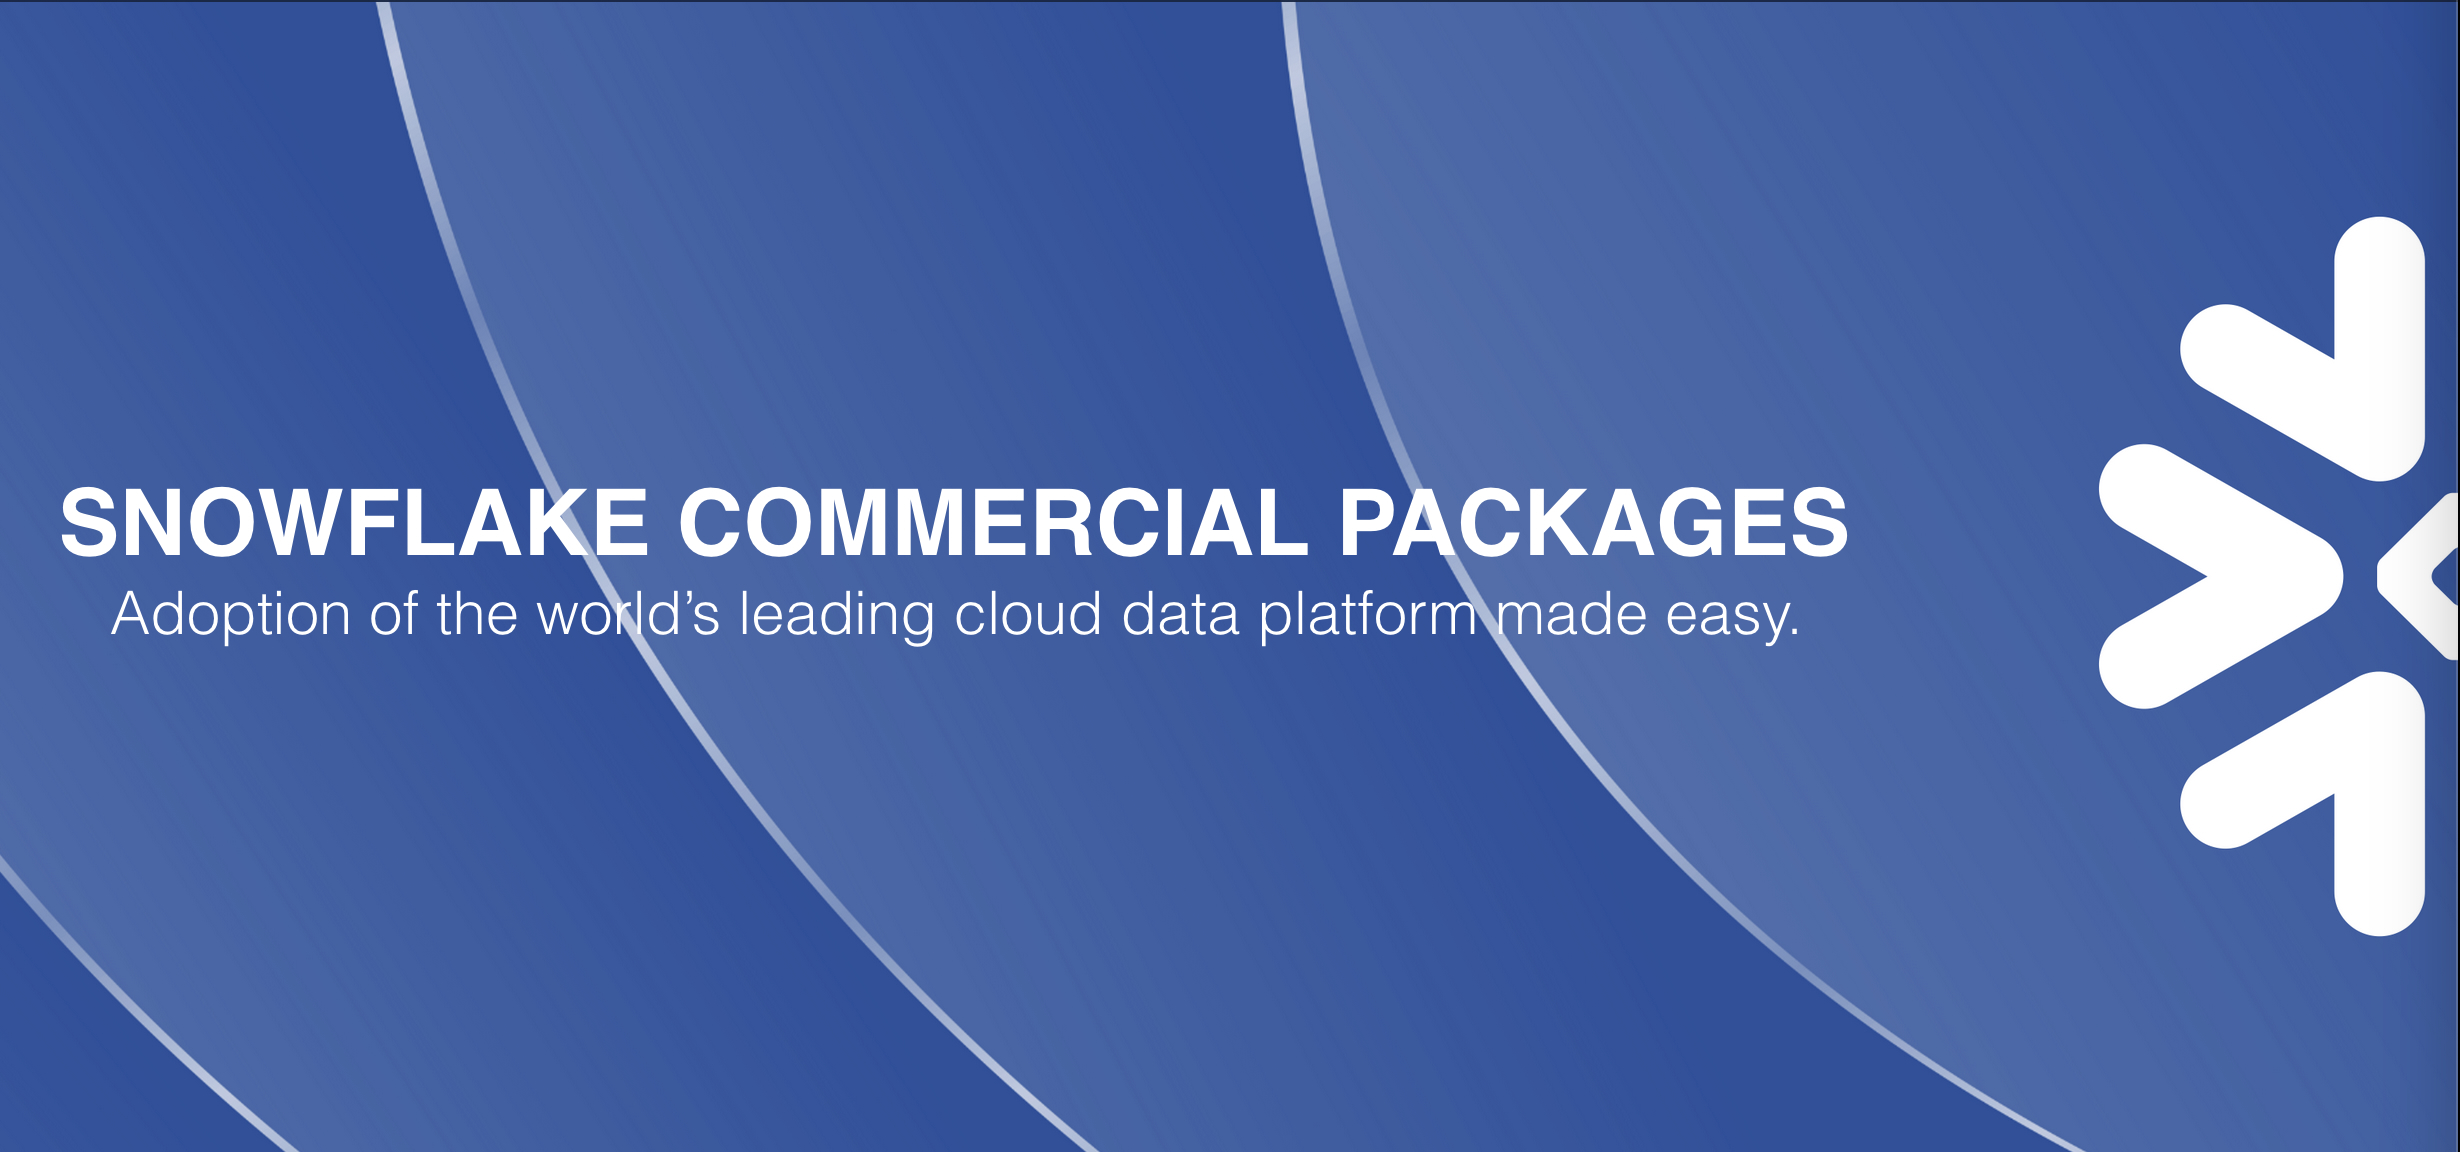 Snowflake Commercial Packages for Enhanced Business Agility